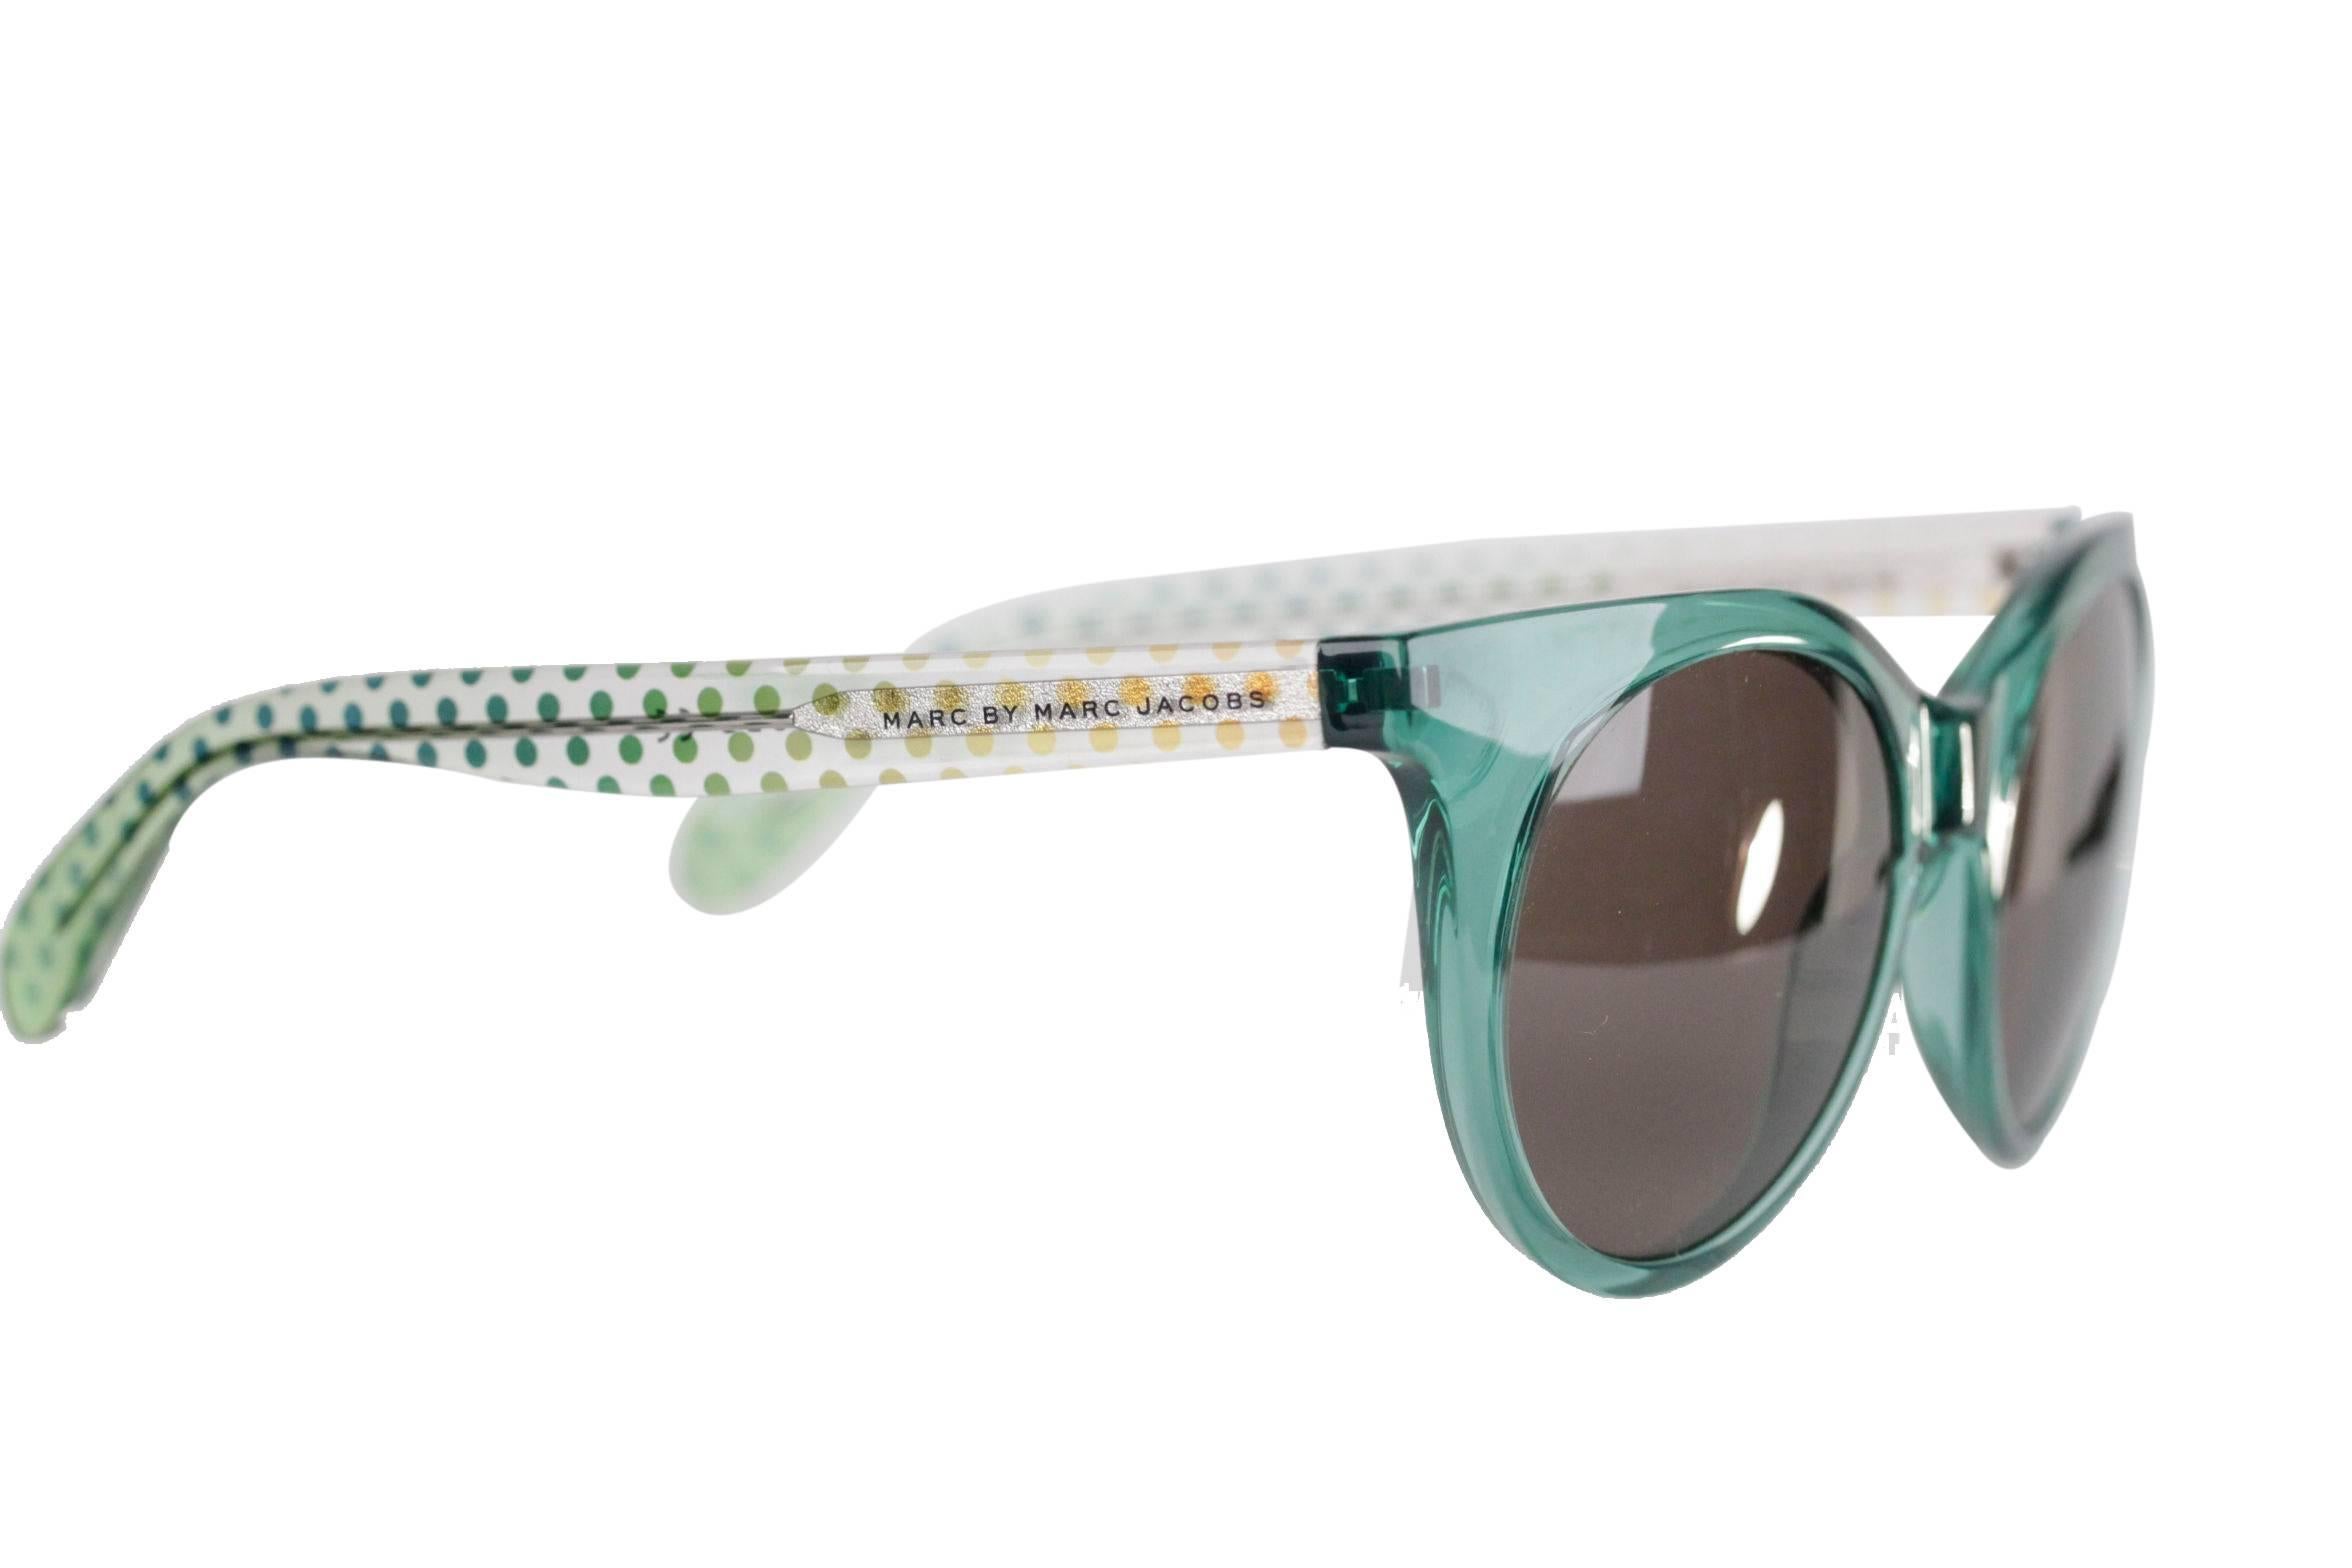  - Marc by Marc Jacobs MMJ 412/S sunglasses
- Green plastic front and plastic transparent Temples with polka dots pattern
- Gray lens
- 'Marc by Marc Jacobs' emobossed on the temple
- Original MARC by MARC JACOBS case and cleaning cloth